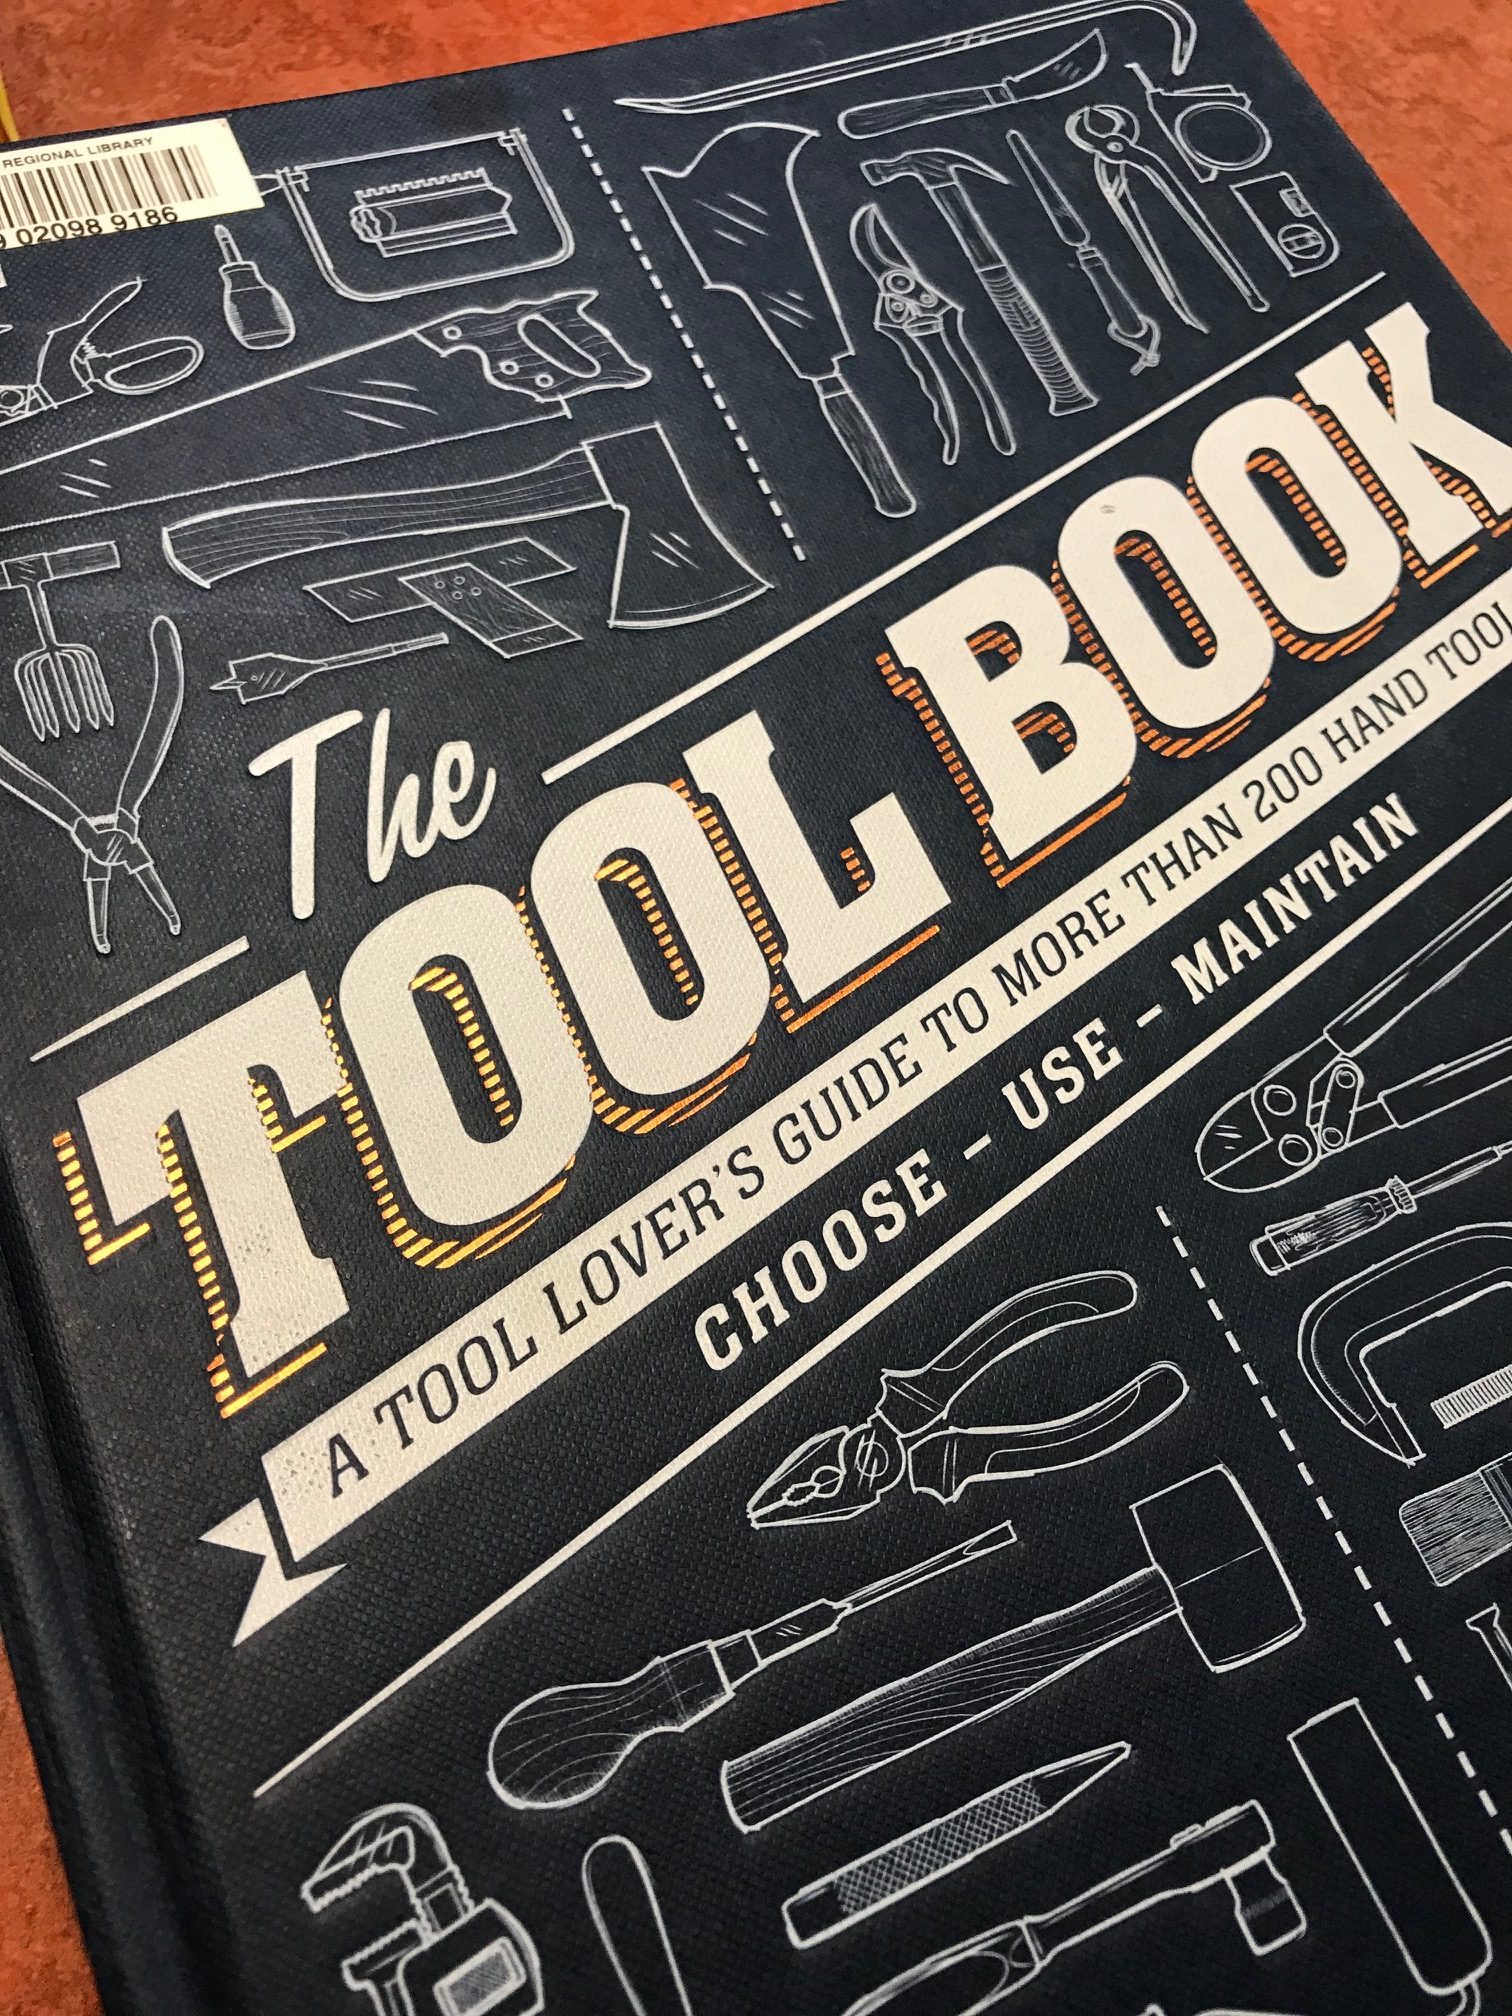 Picture of the cover of "The Tool Box: A tool lover's guide to more than 200 hand tools."